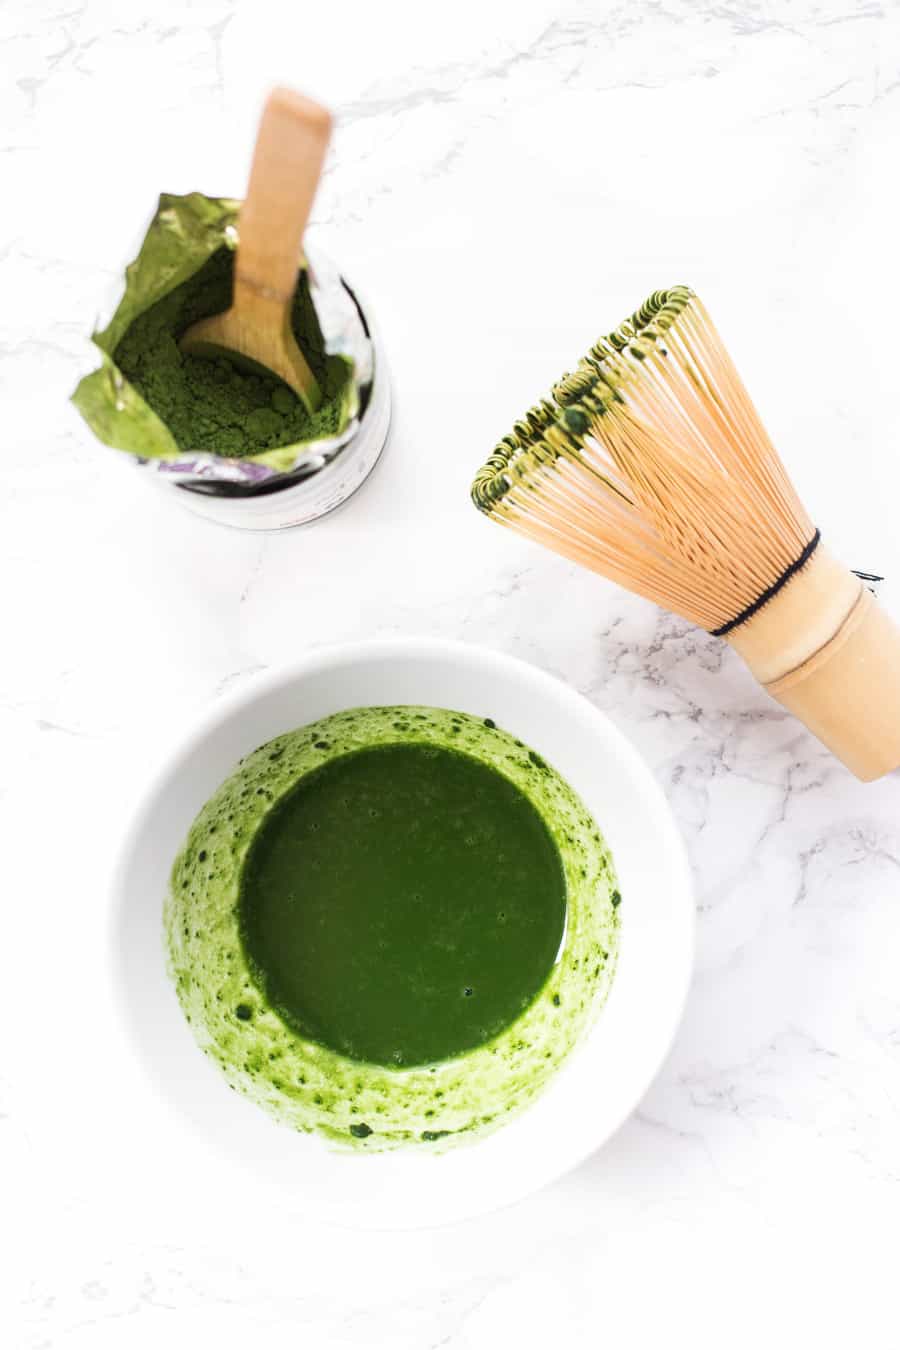 Overhead view of matcha powder, whisk, and matcha in small bowl